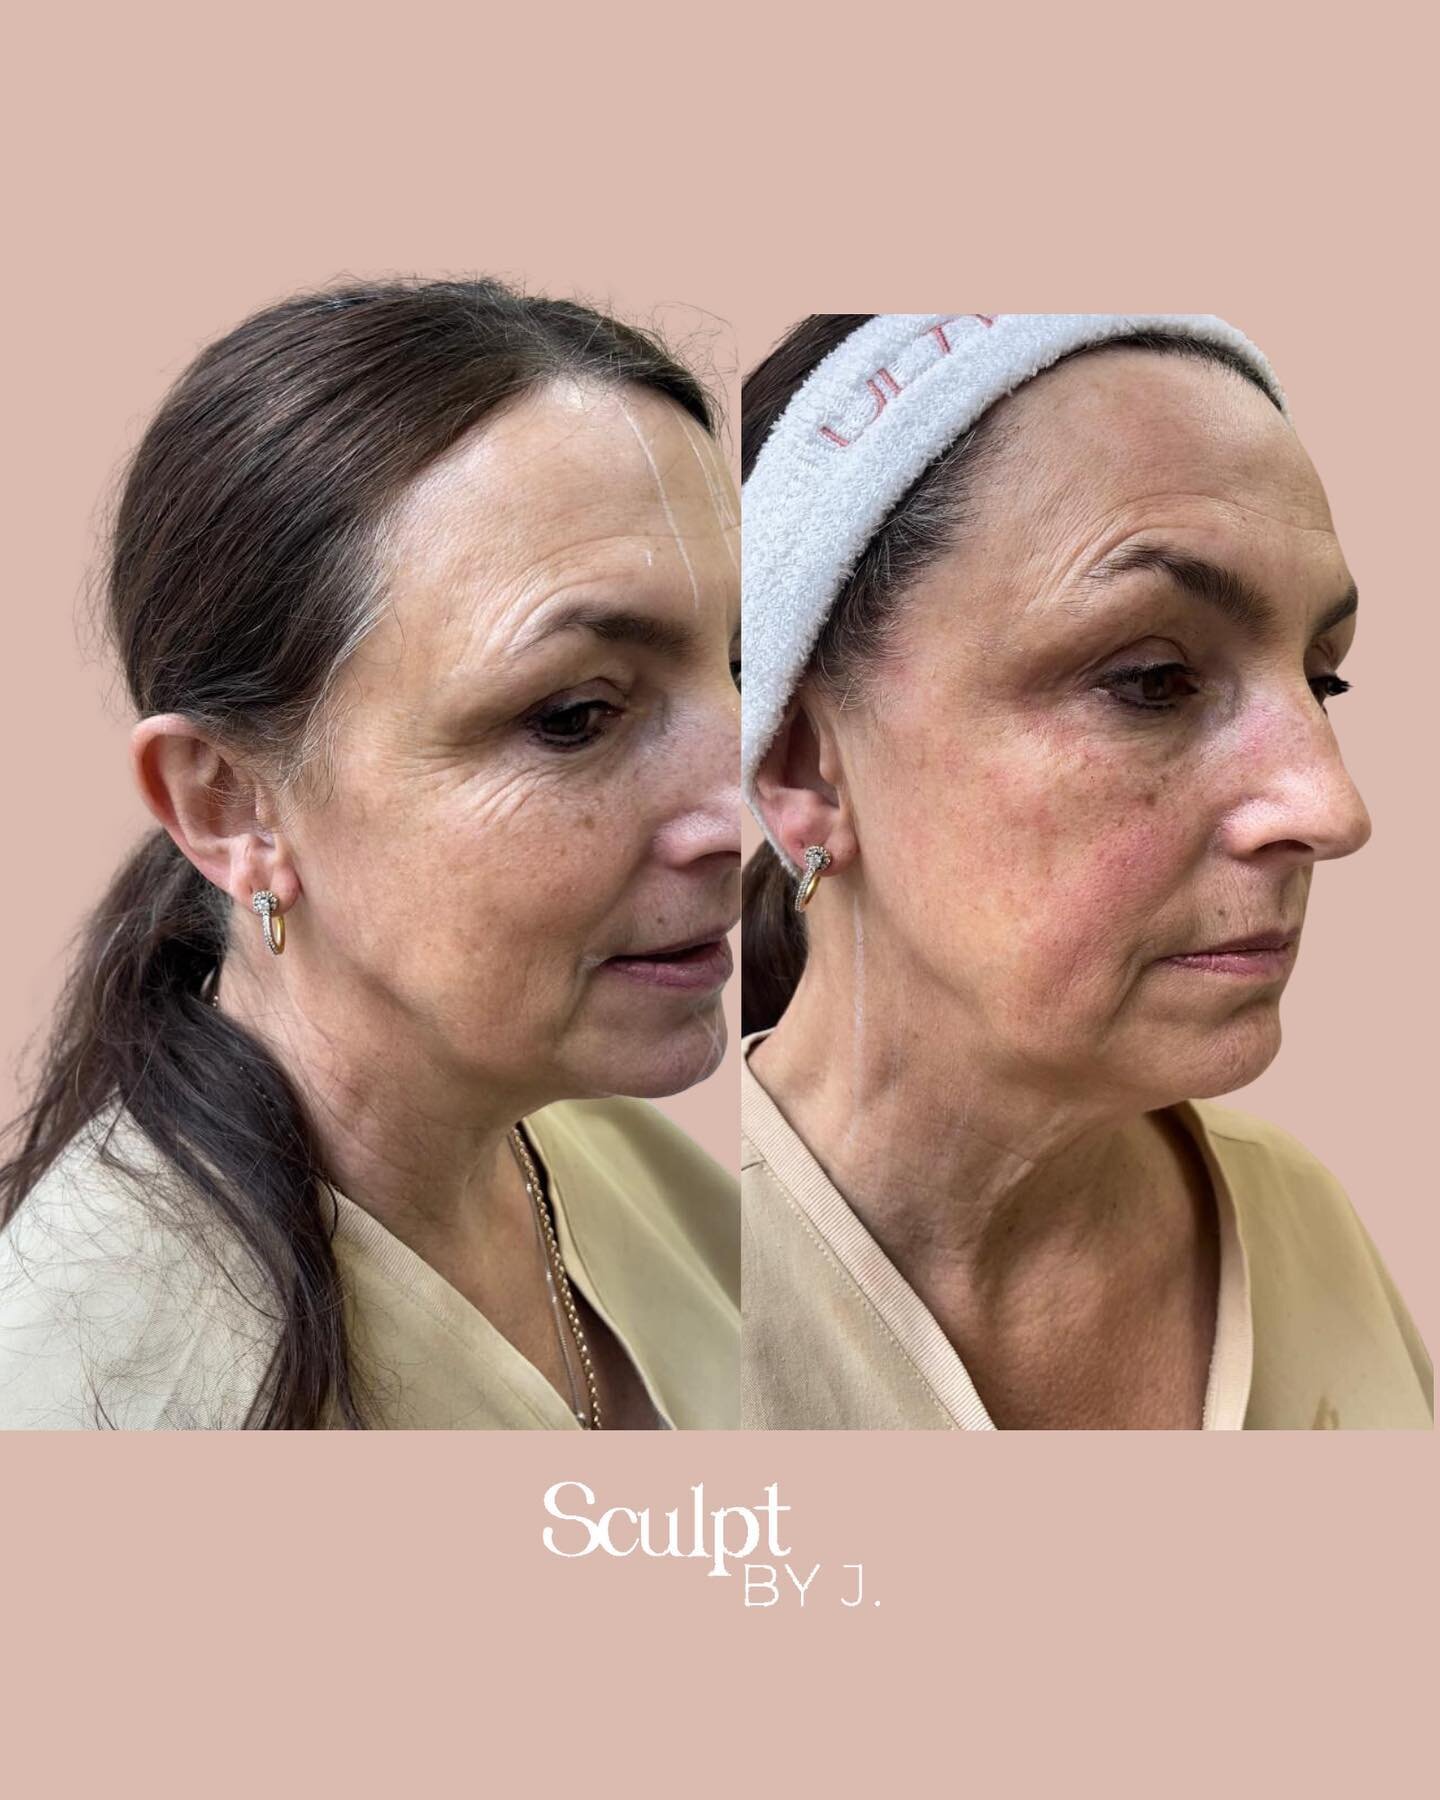 Our Non Surgical Facelift - Hifu Ultracel Q + after ONE session!

Lift, tighten, smooth wrinkles and contour your face and neck with the latest HIFU technology

What is HIFU?

This is a TGA approved medical grade device which delivers completely non-